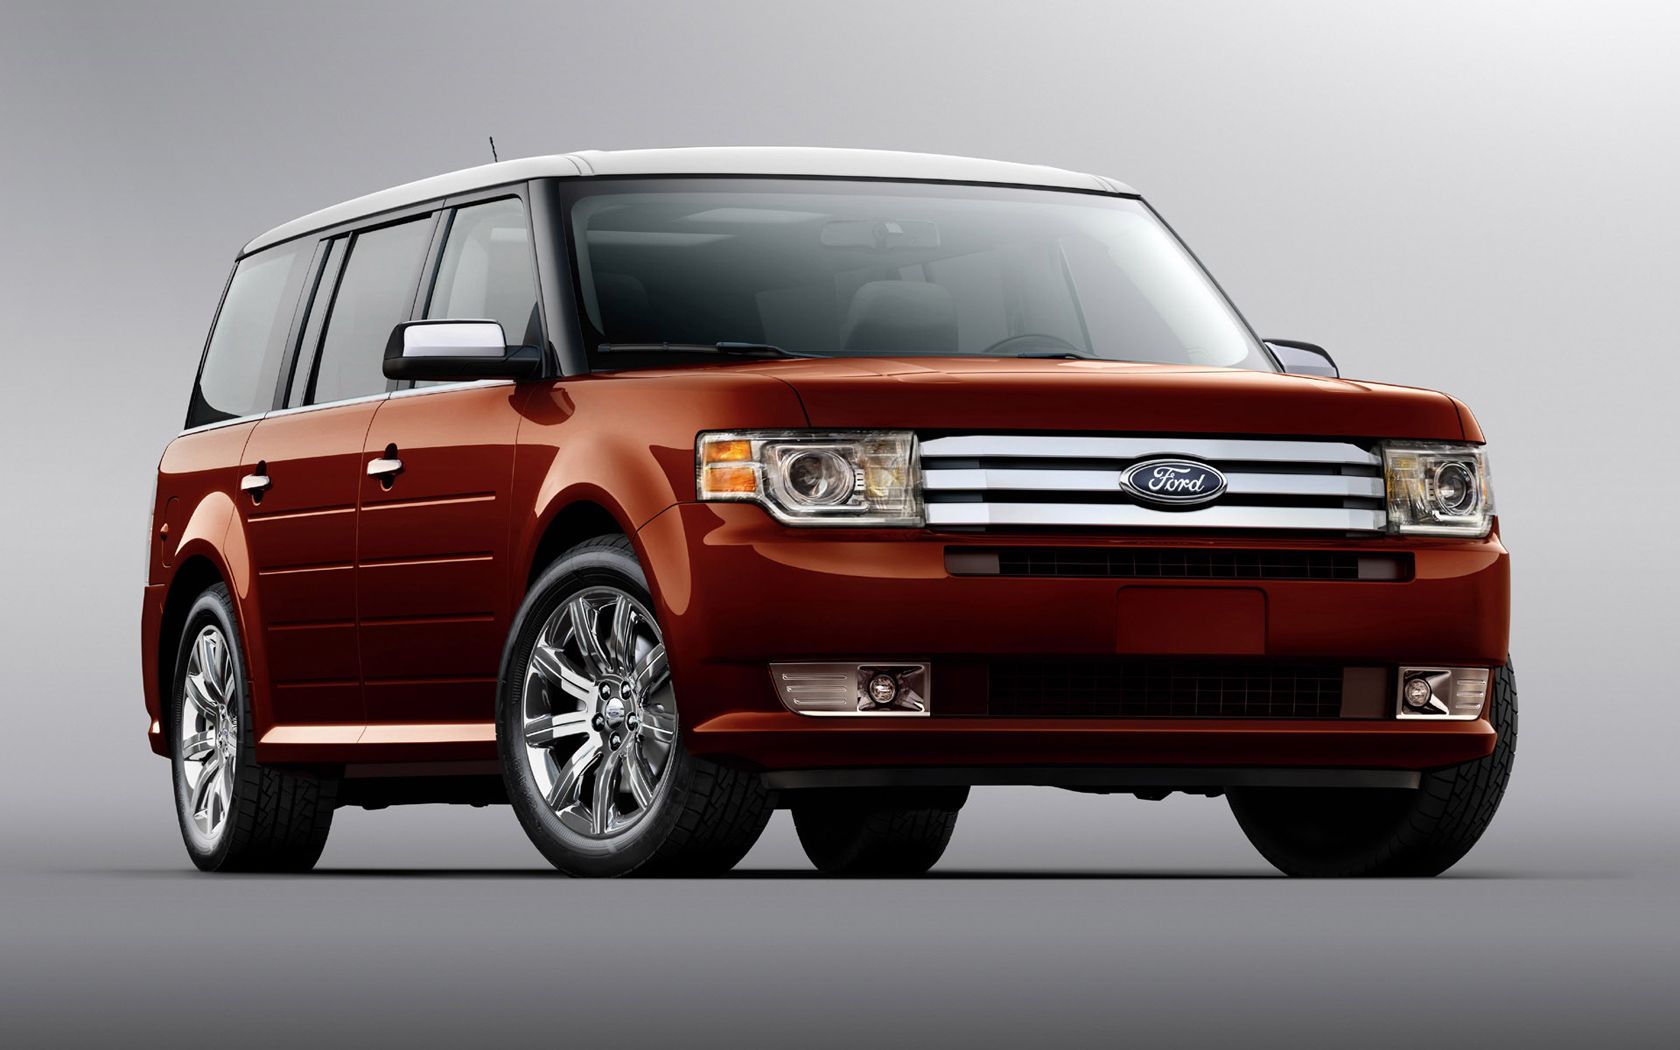 1680x1050 Red Ford suv desktop PC and Mac wallpaper